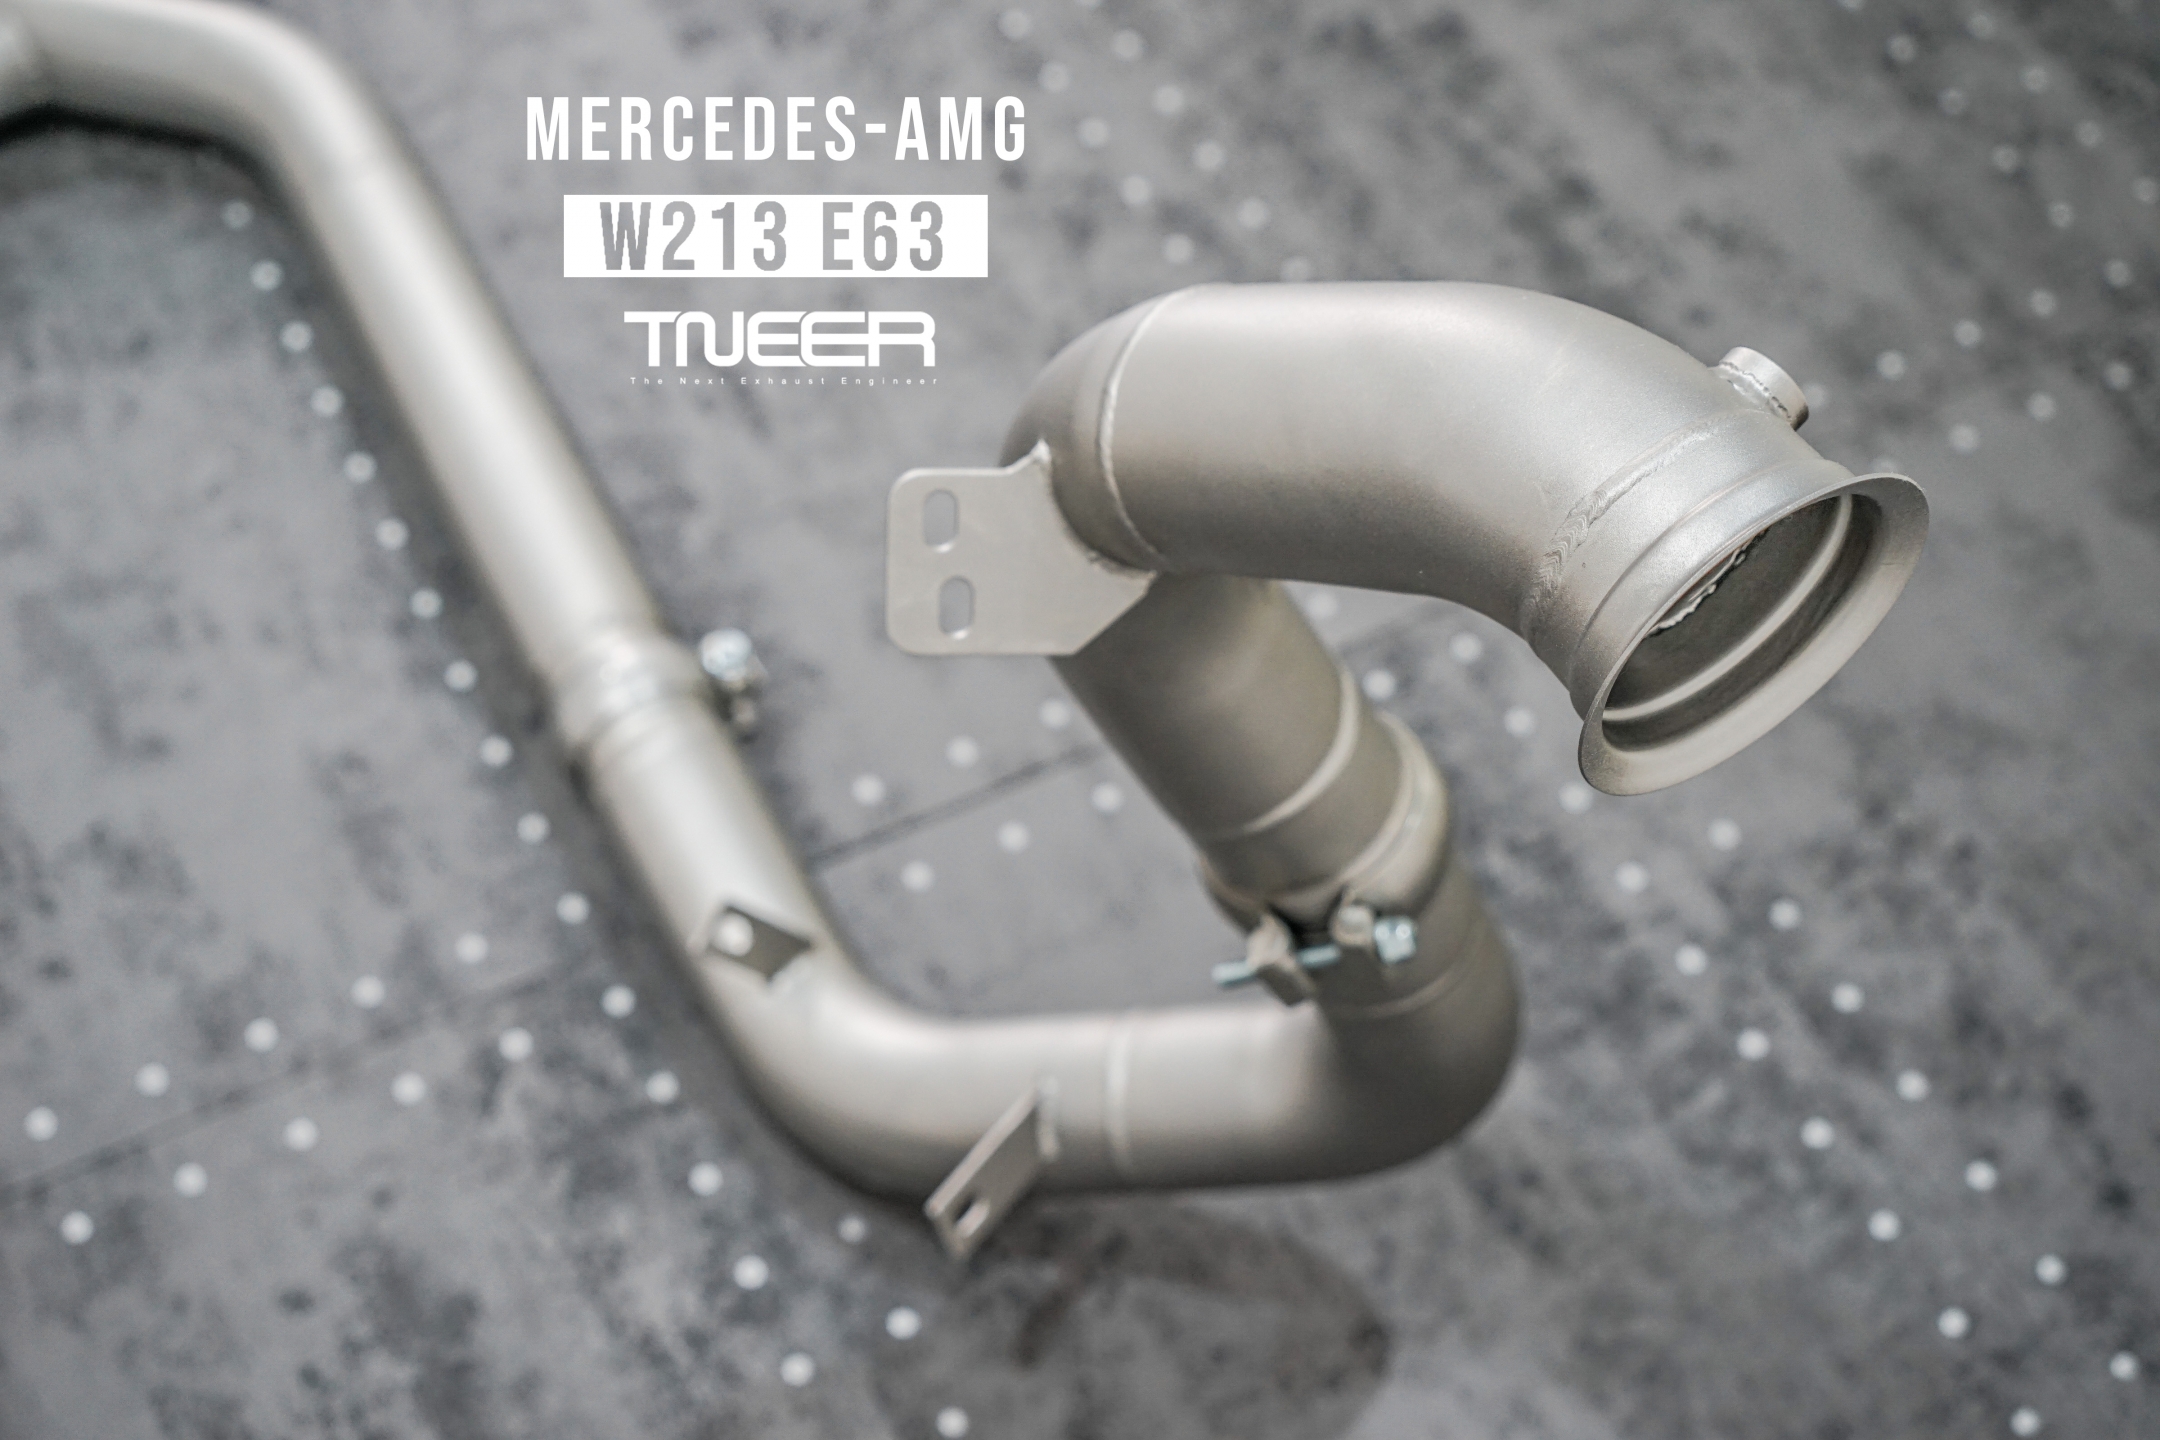 Mercedes-AMG W213 E63 TNEER Performance Exhaust System